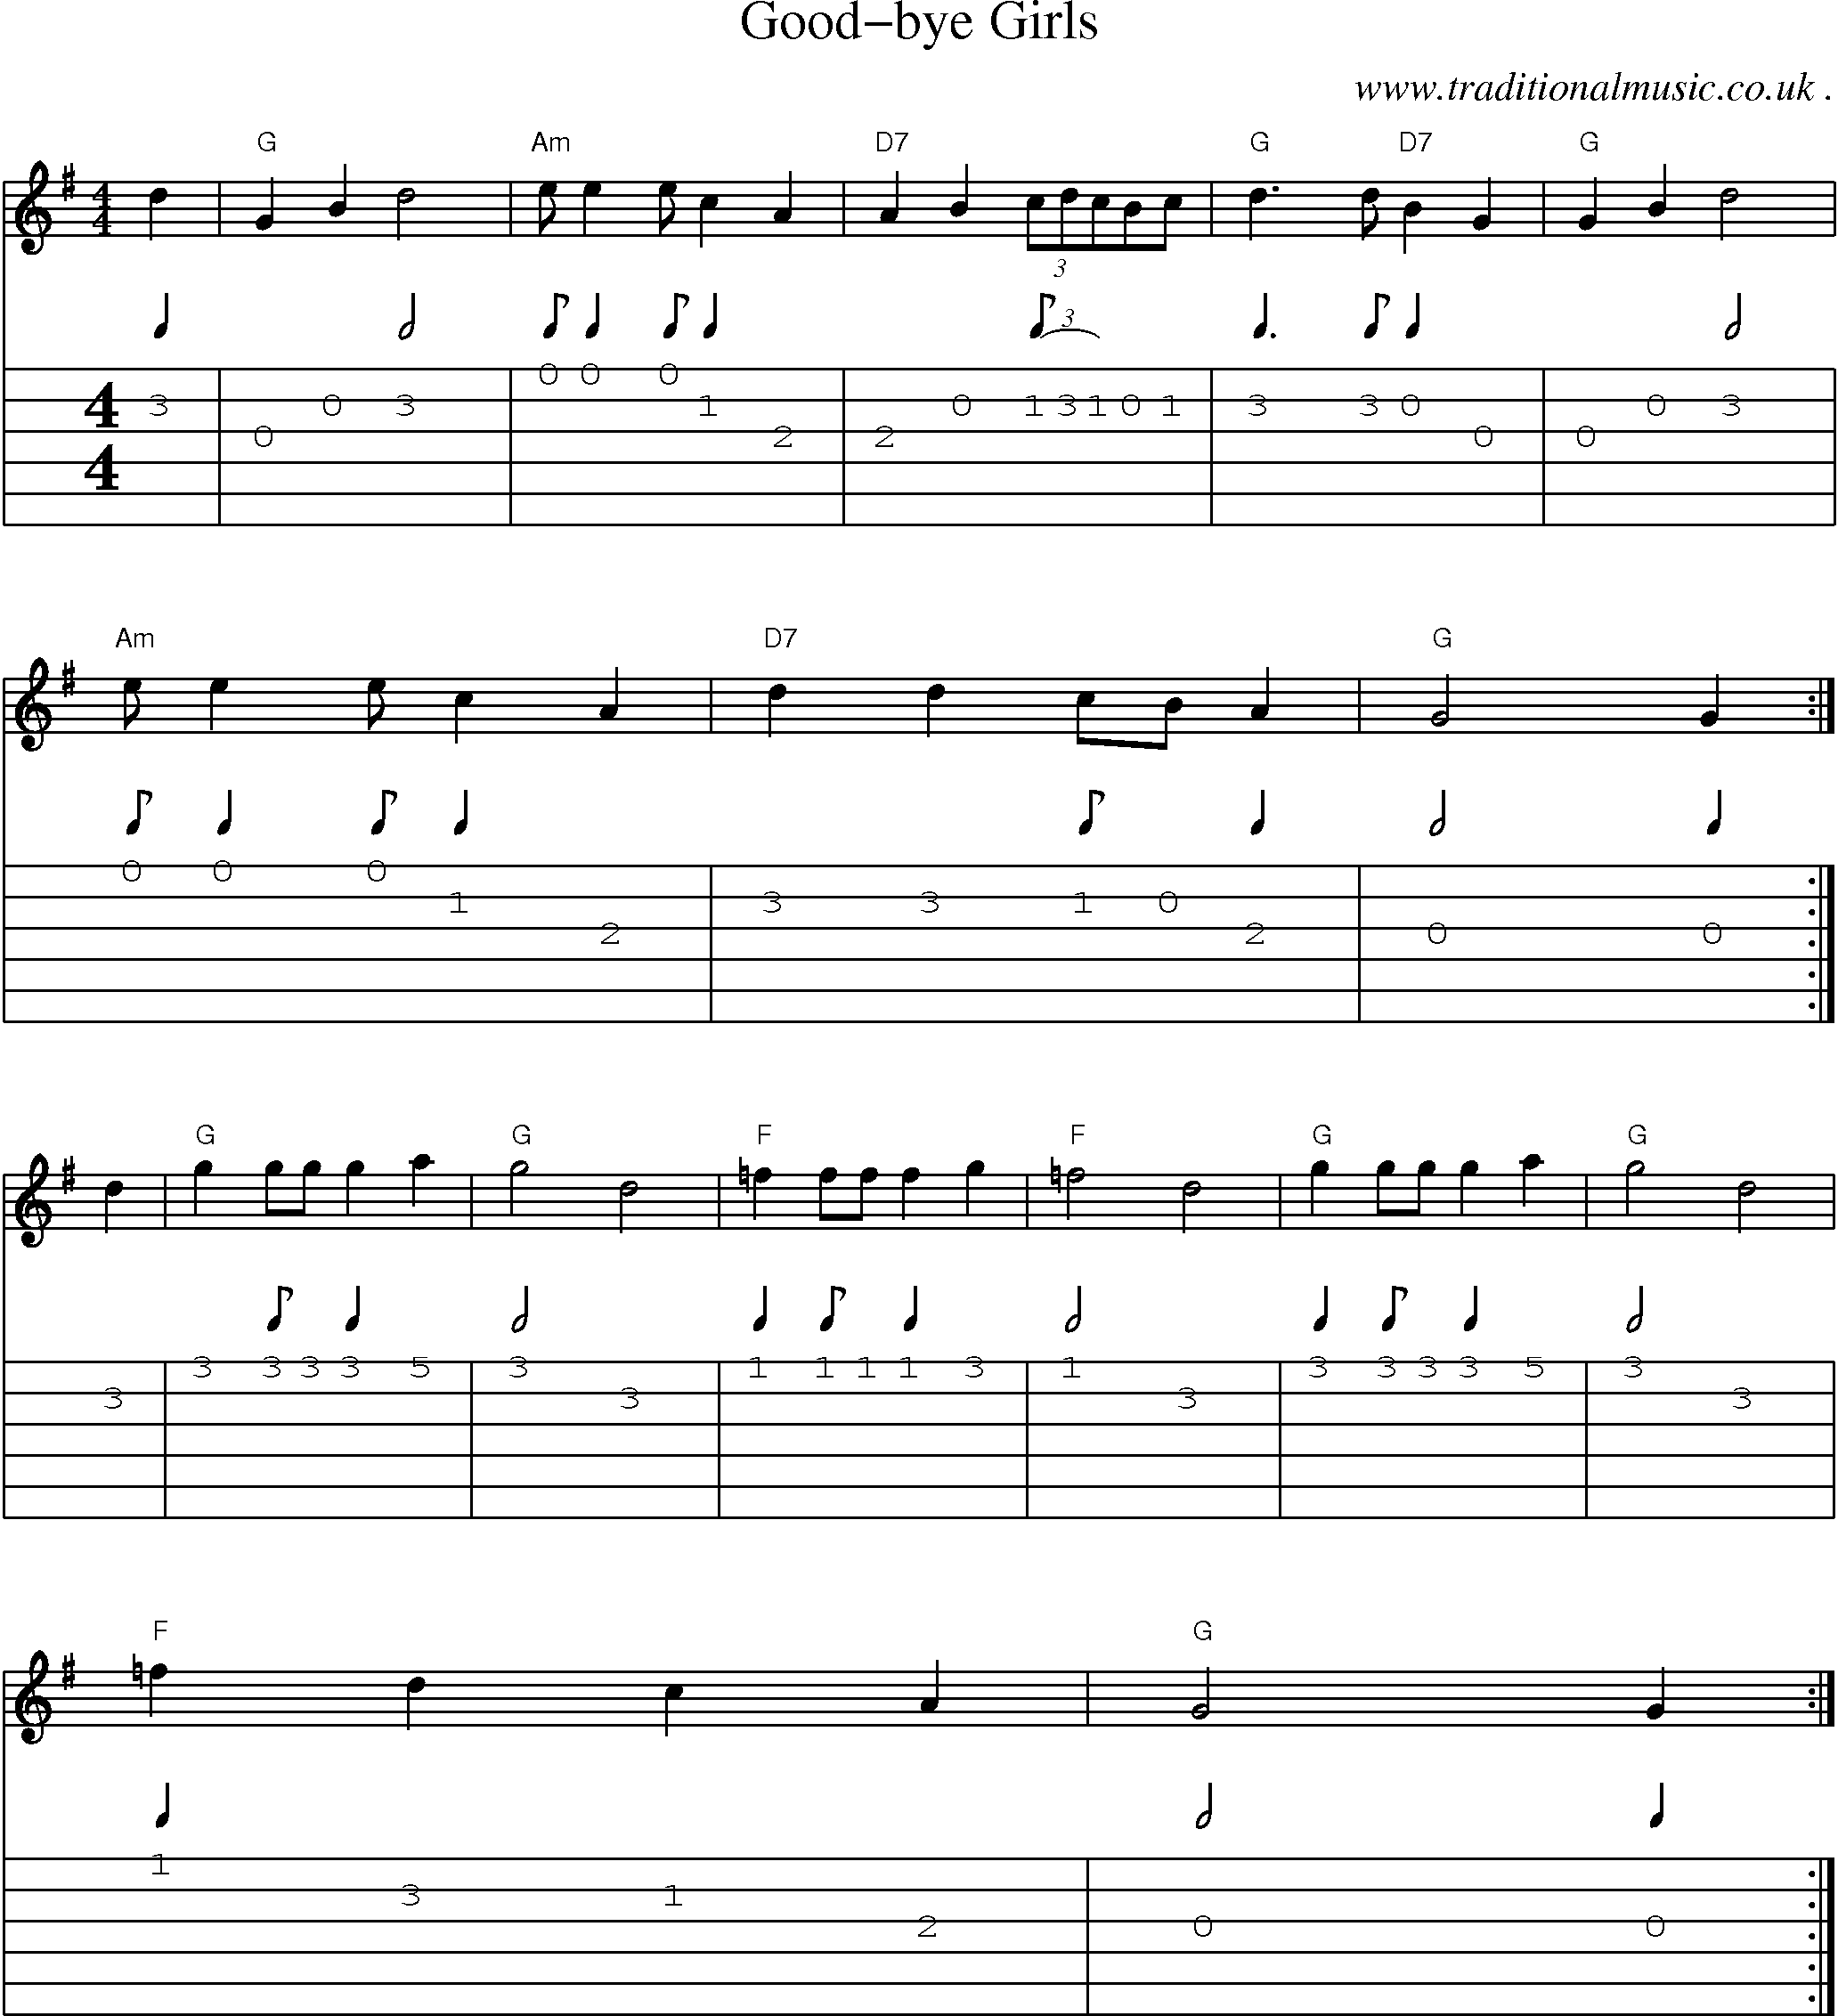 Sheet-Music and Guitar Tabs for Good-bye Girls